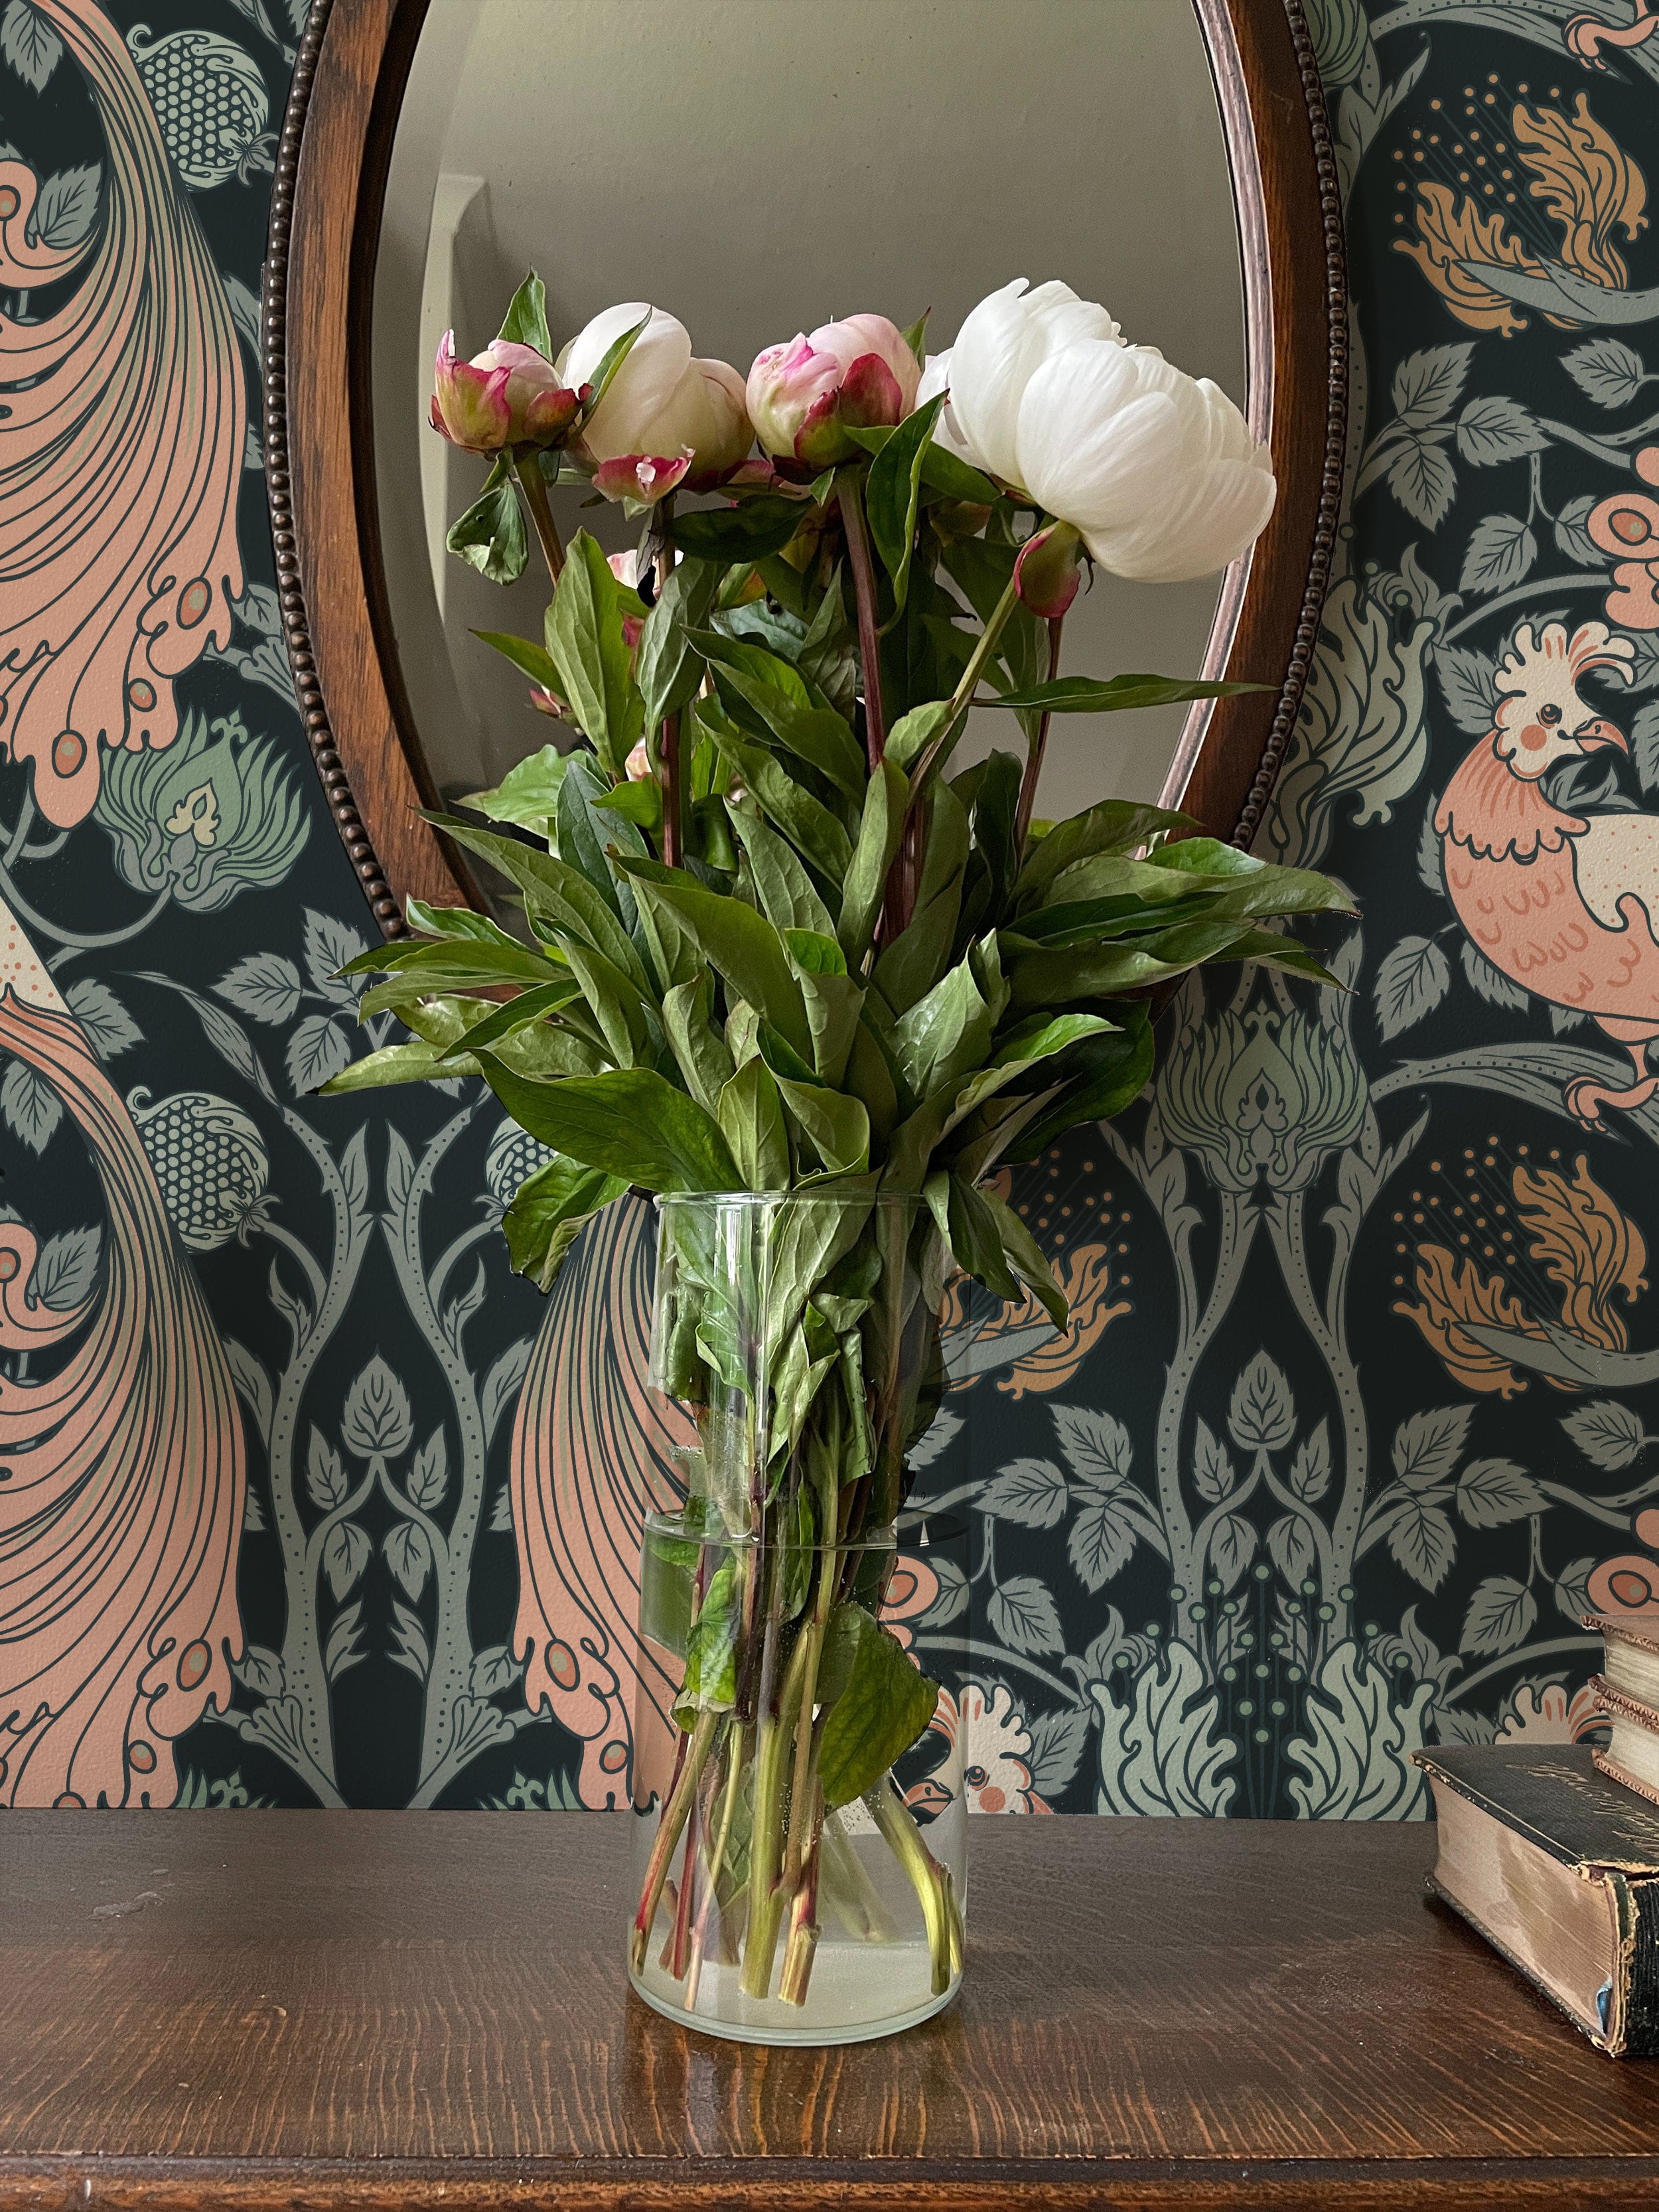 Peacock Damask Wallpaper in a sophisticated interior, featuring a dark floral and peacock design with elegant pink and green accents, a vintage mirror, and a glass vase with fresh peonies on a wooden table.